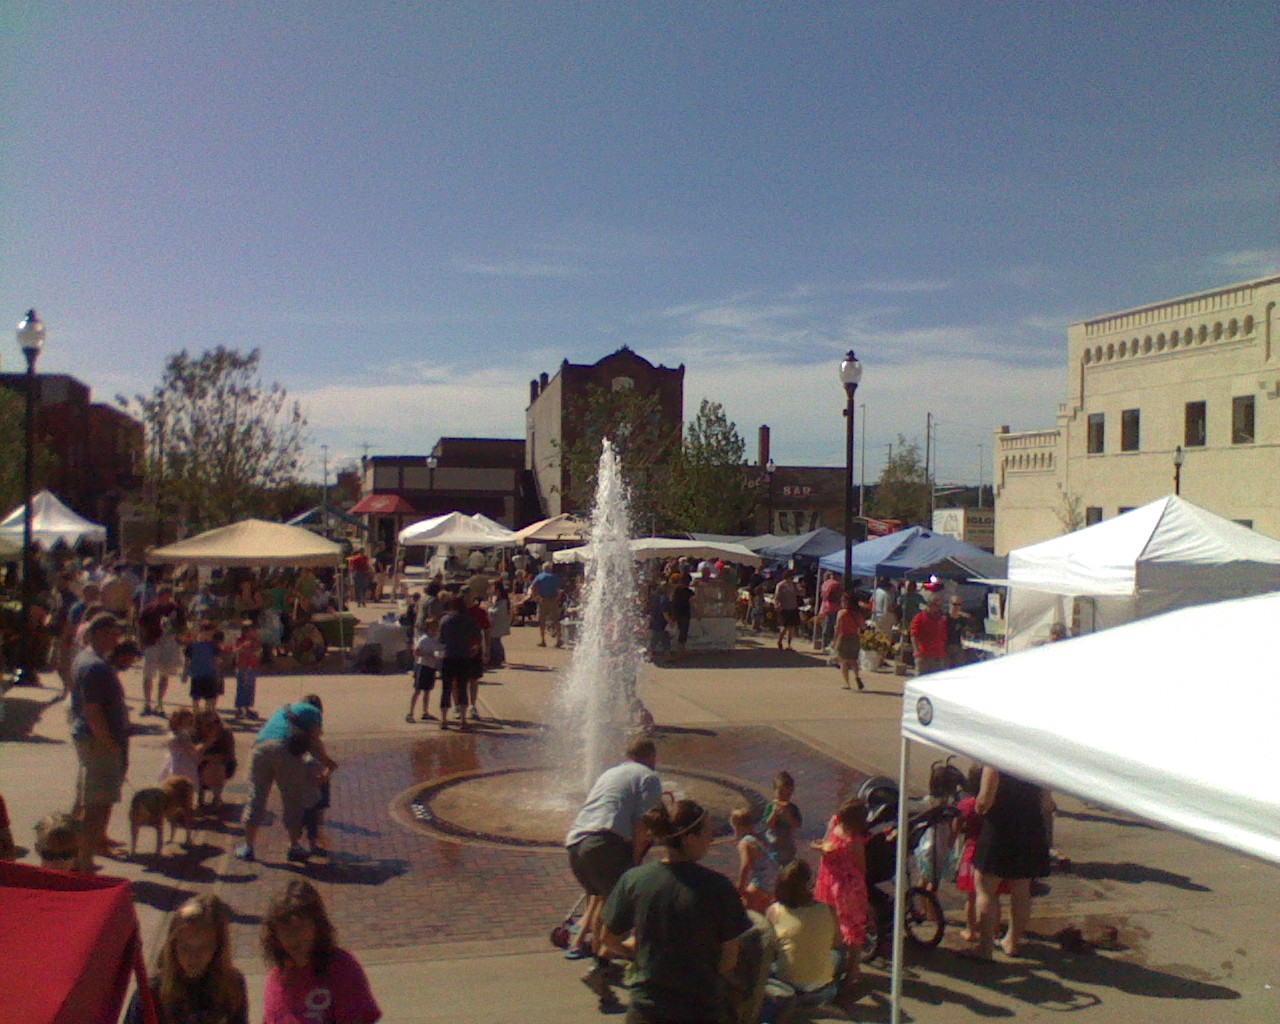 Stevens point Farmers Market is a busy place on Saturdays.